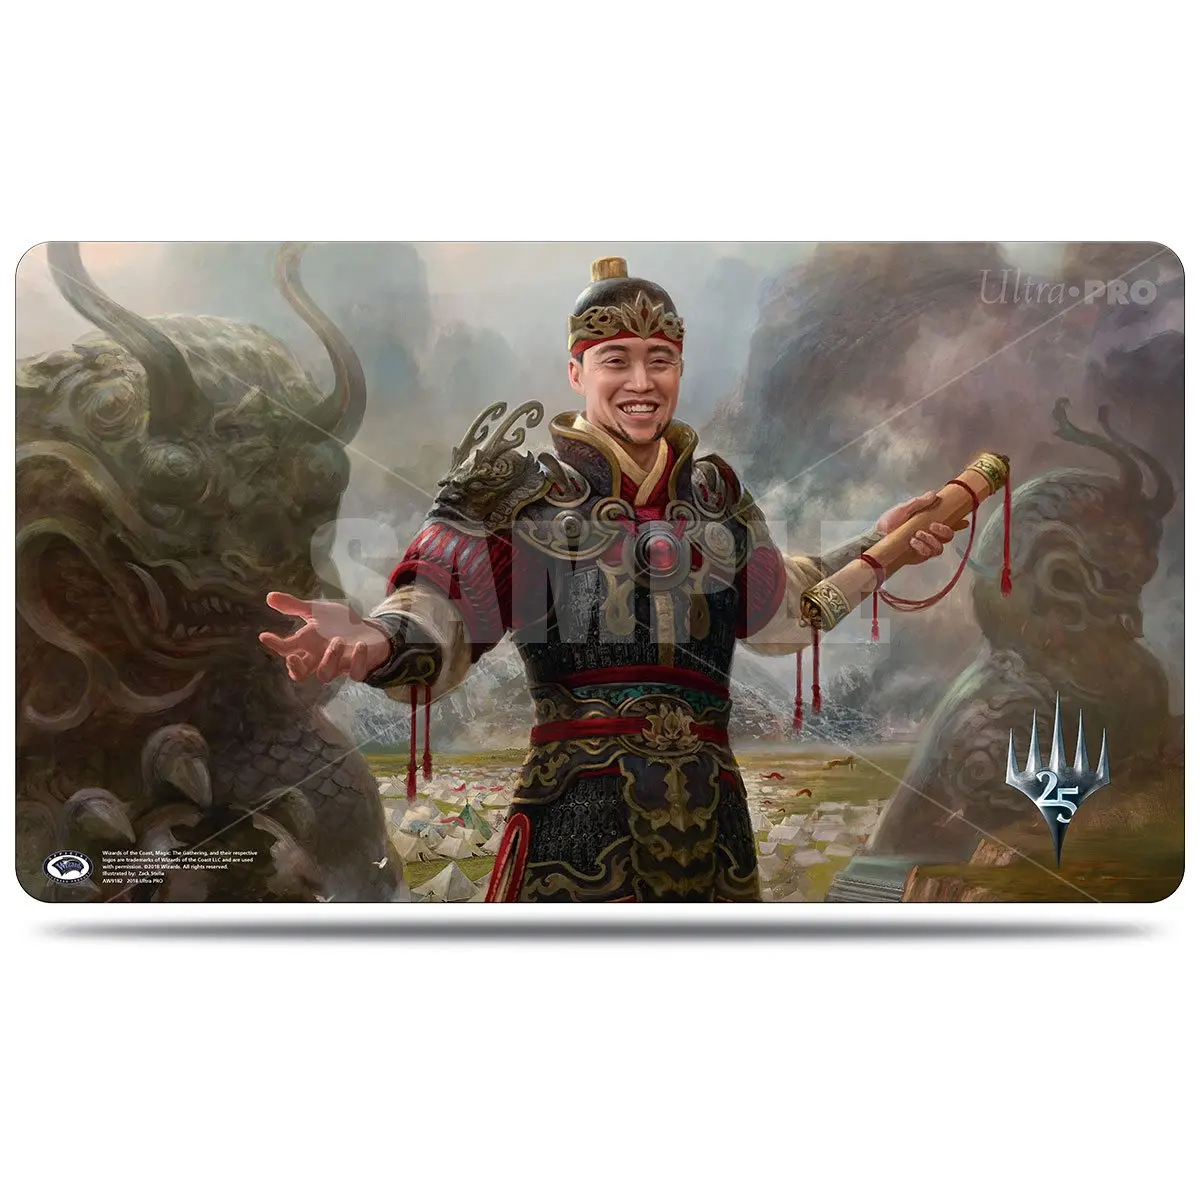 Magic: The Gathering Masters 25 "Imperial Recruiter" Playmat.